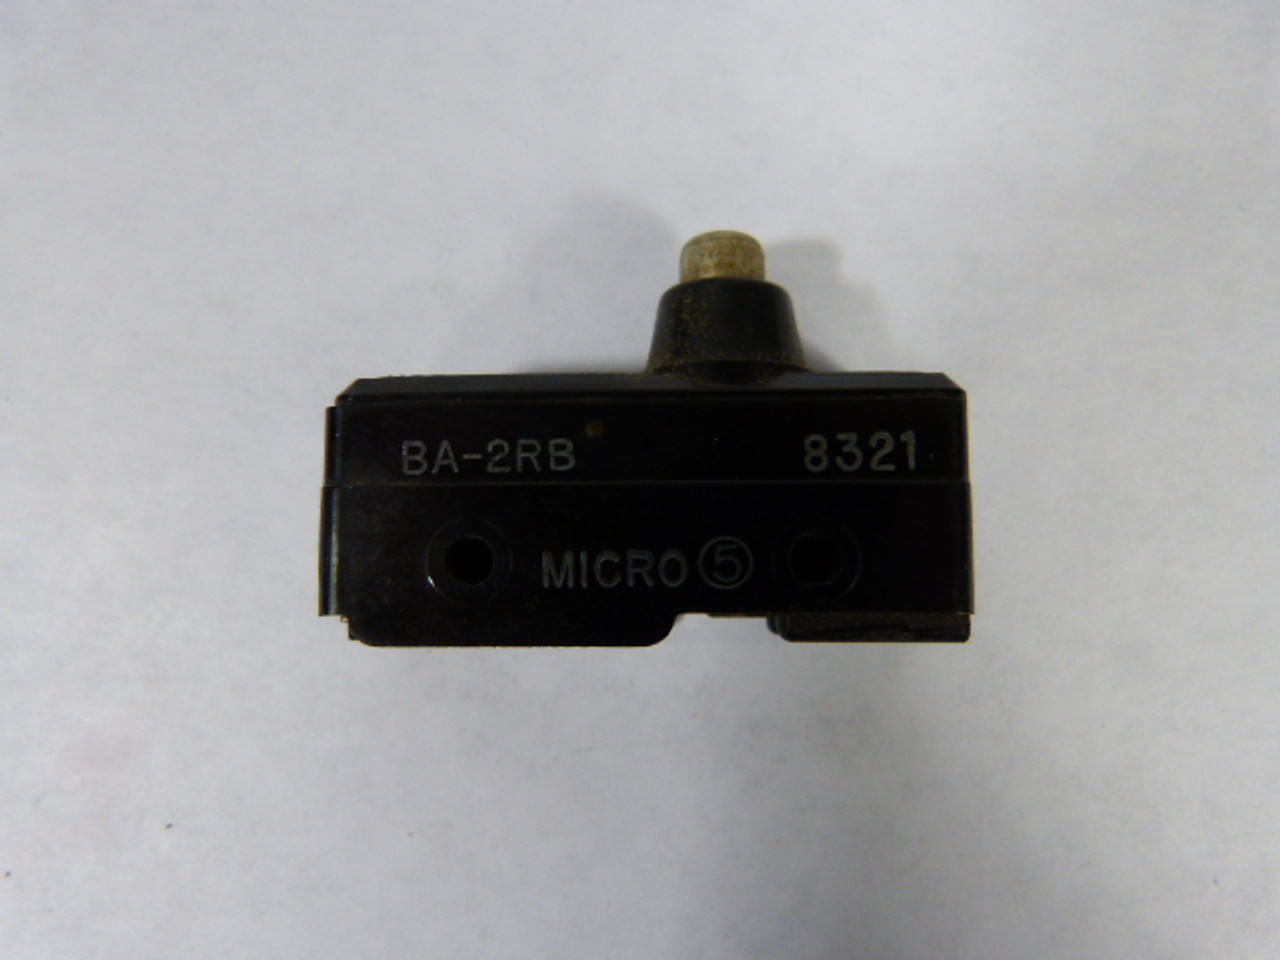 Microswitch BA-2RB Snap Action Limit Switch with Plunger 20A 250V USED